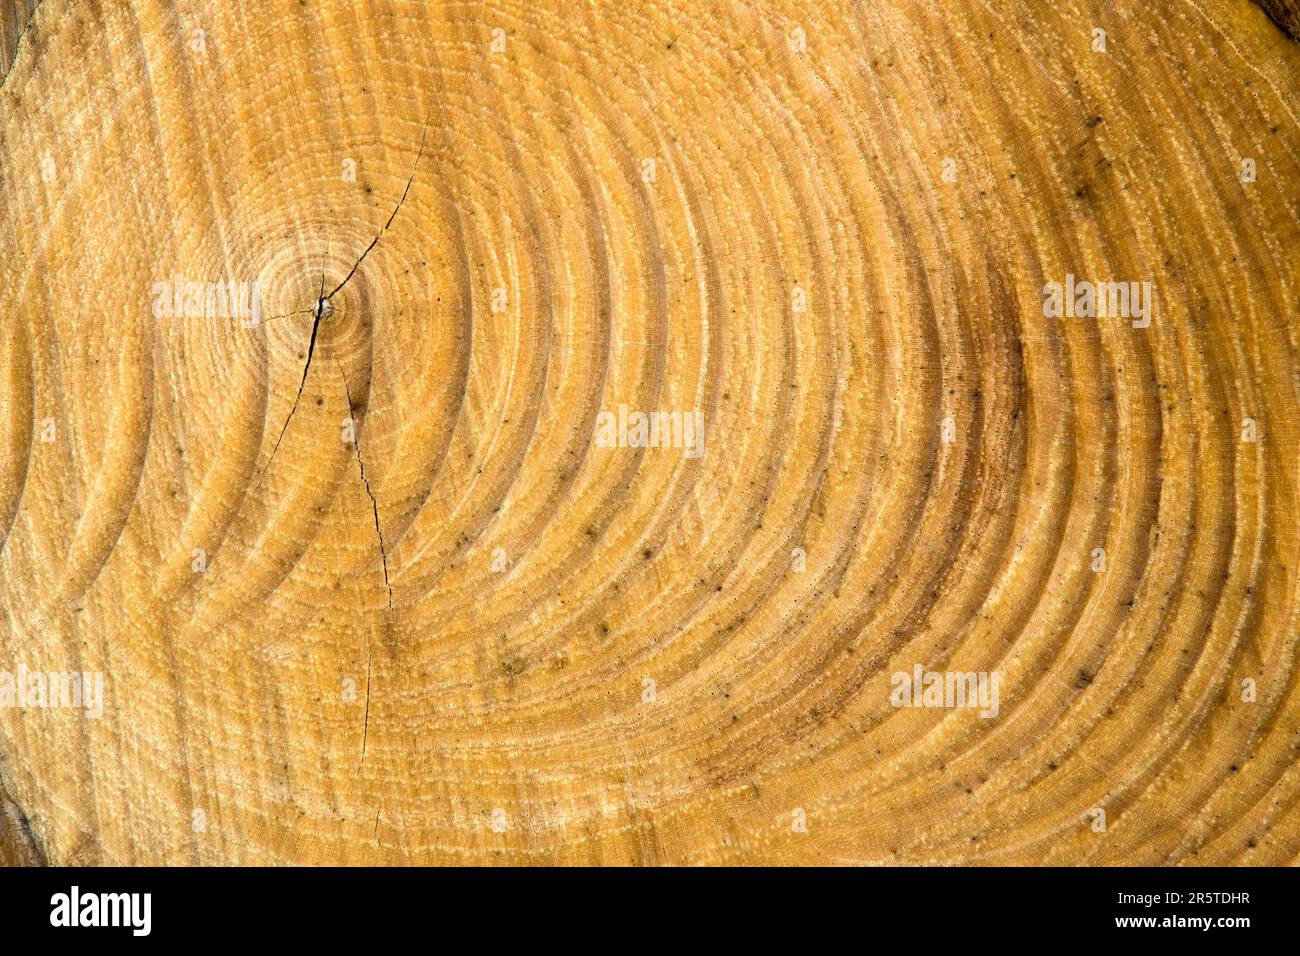 Tree rings and chainsaw scars on a Shagbark Hickory Stock Photo